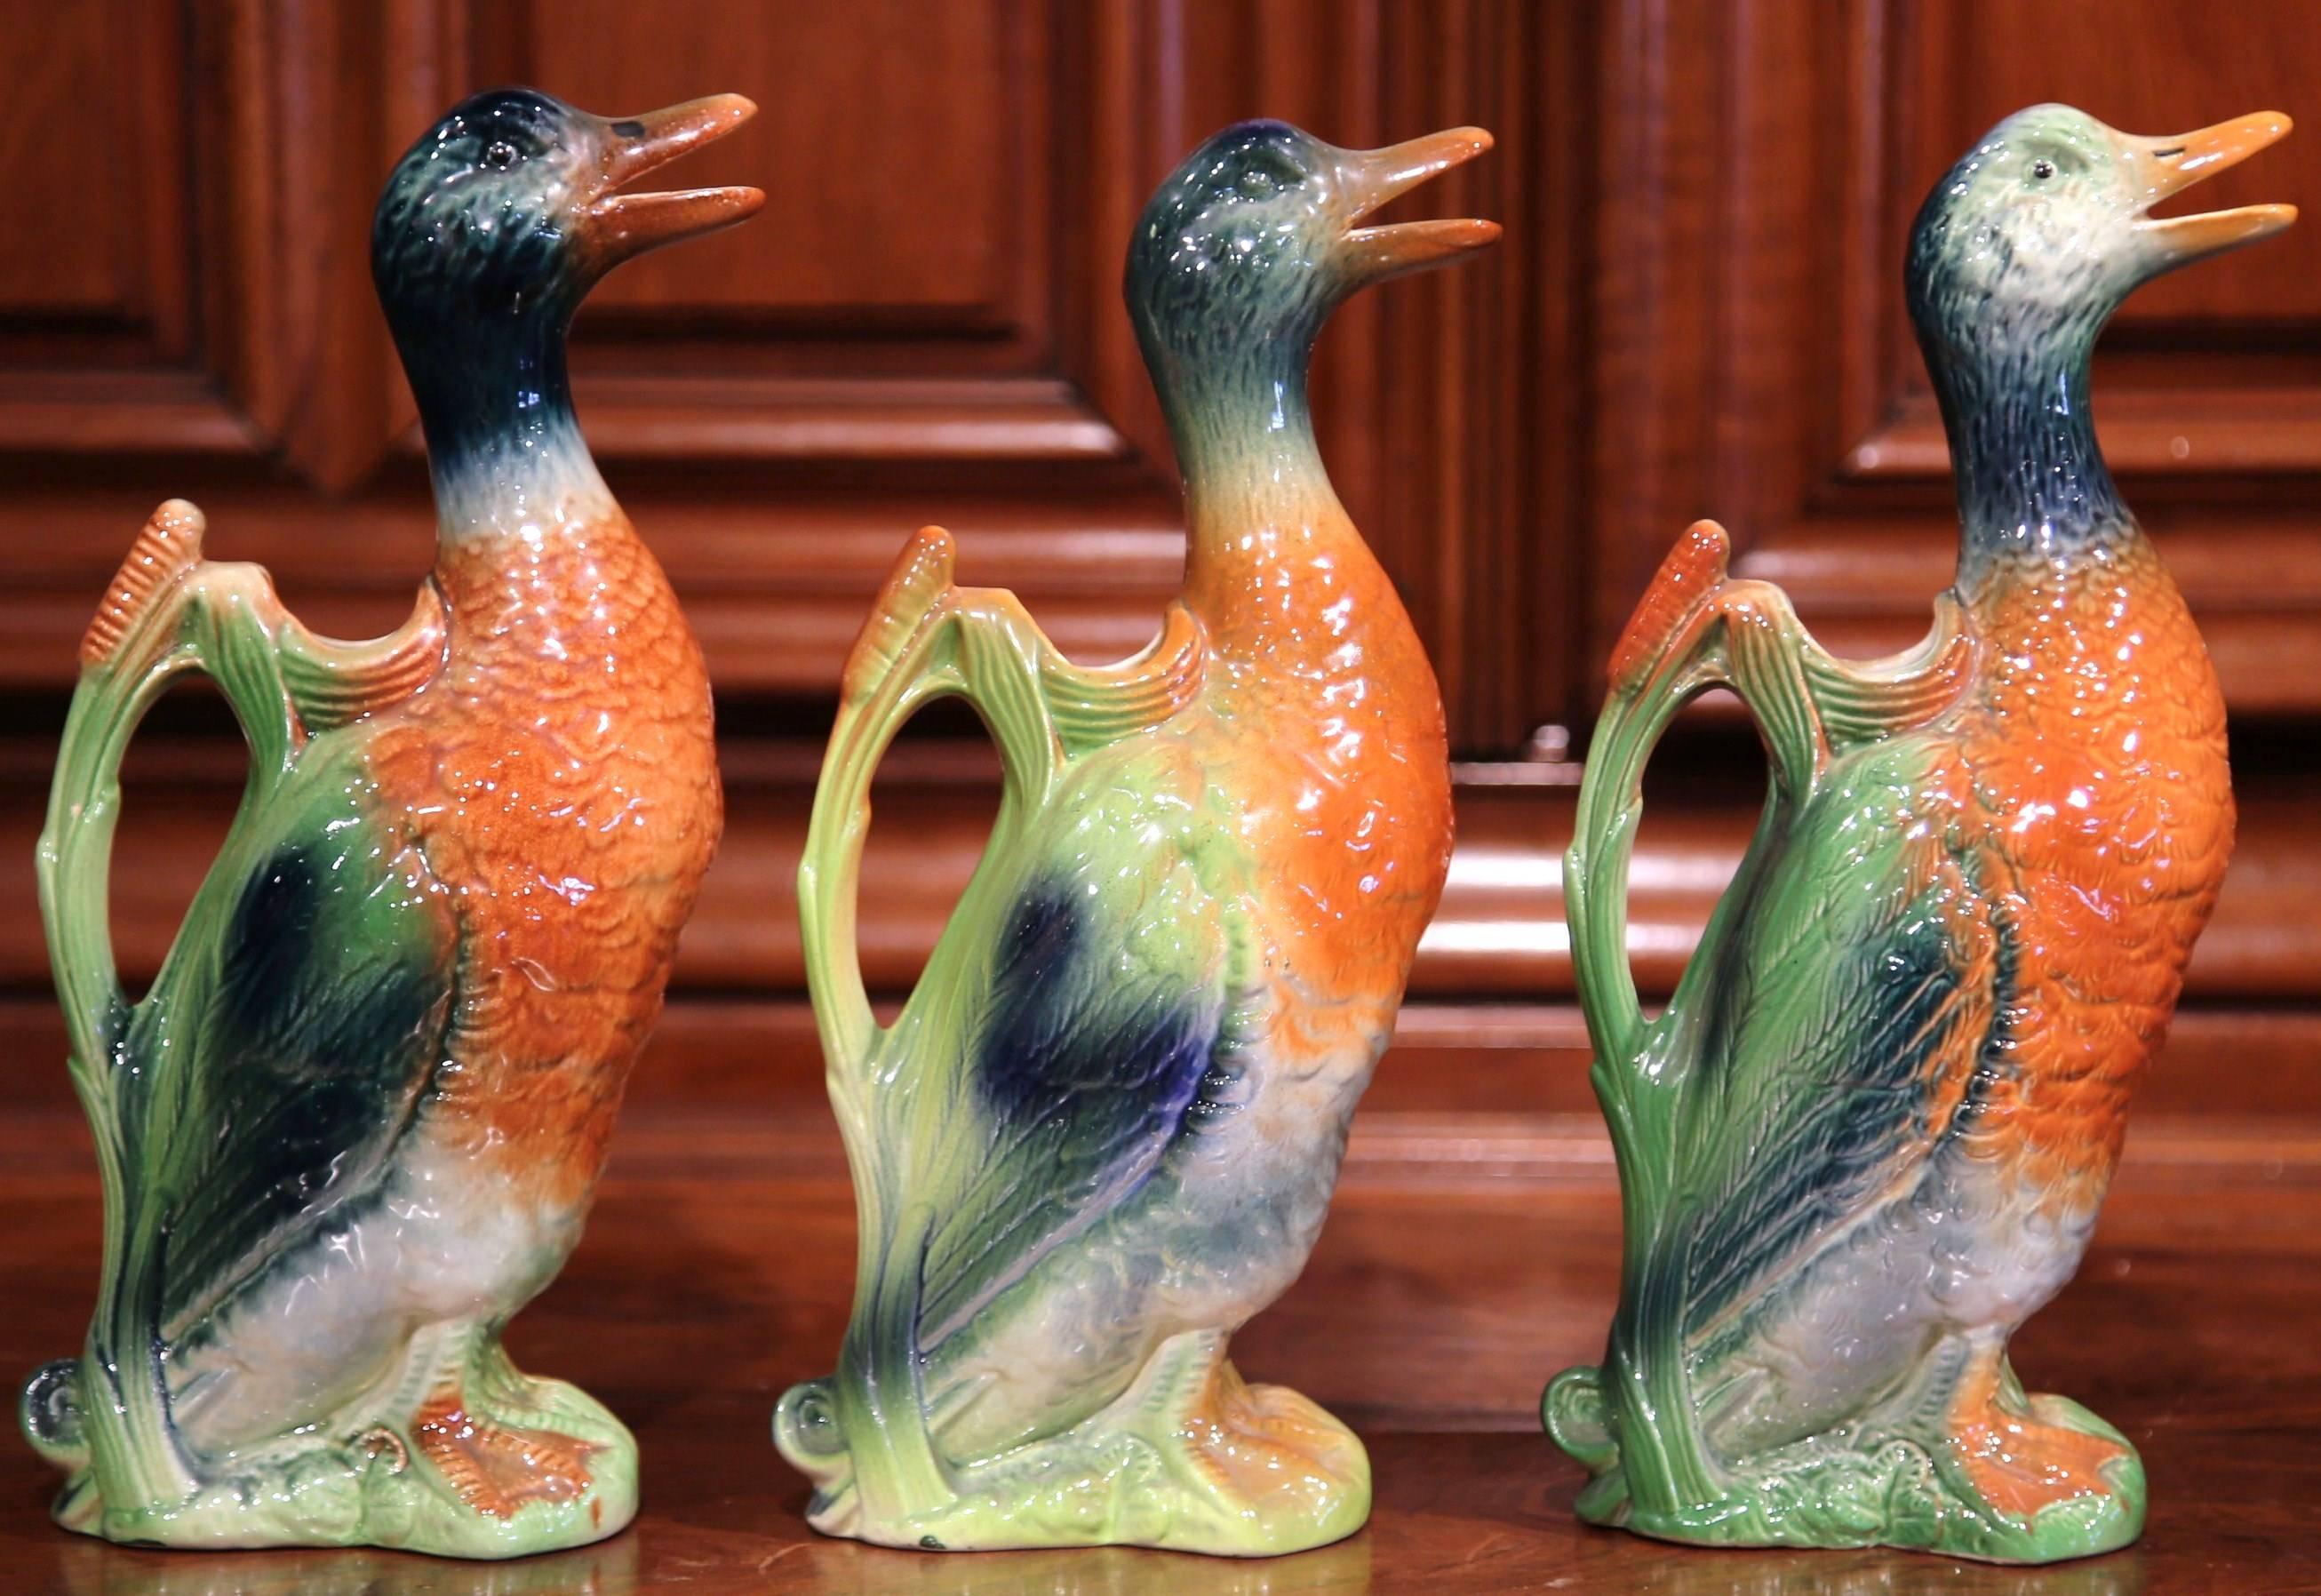 This beautiful set of Majolica water pitchers were sculpted in France, circa 1910. Each hand painted, ceramic jug is in the shape of a colorful duck, and has an open beak as a spout and a back handle for easy pouring. Two of the porcelain bird